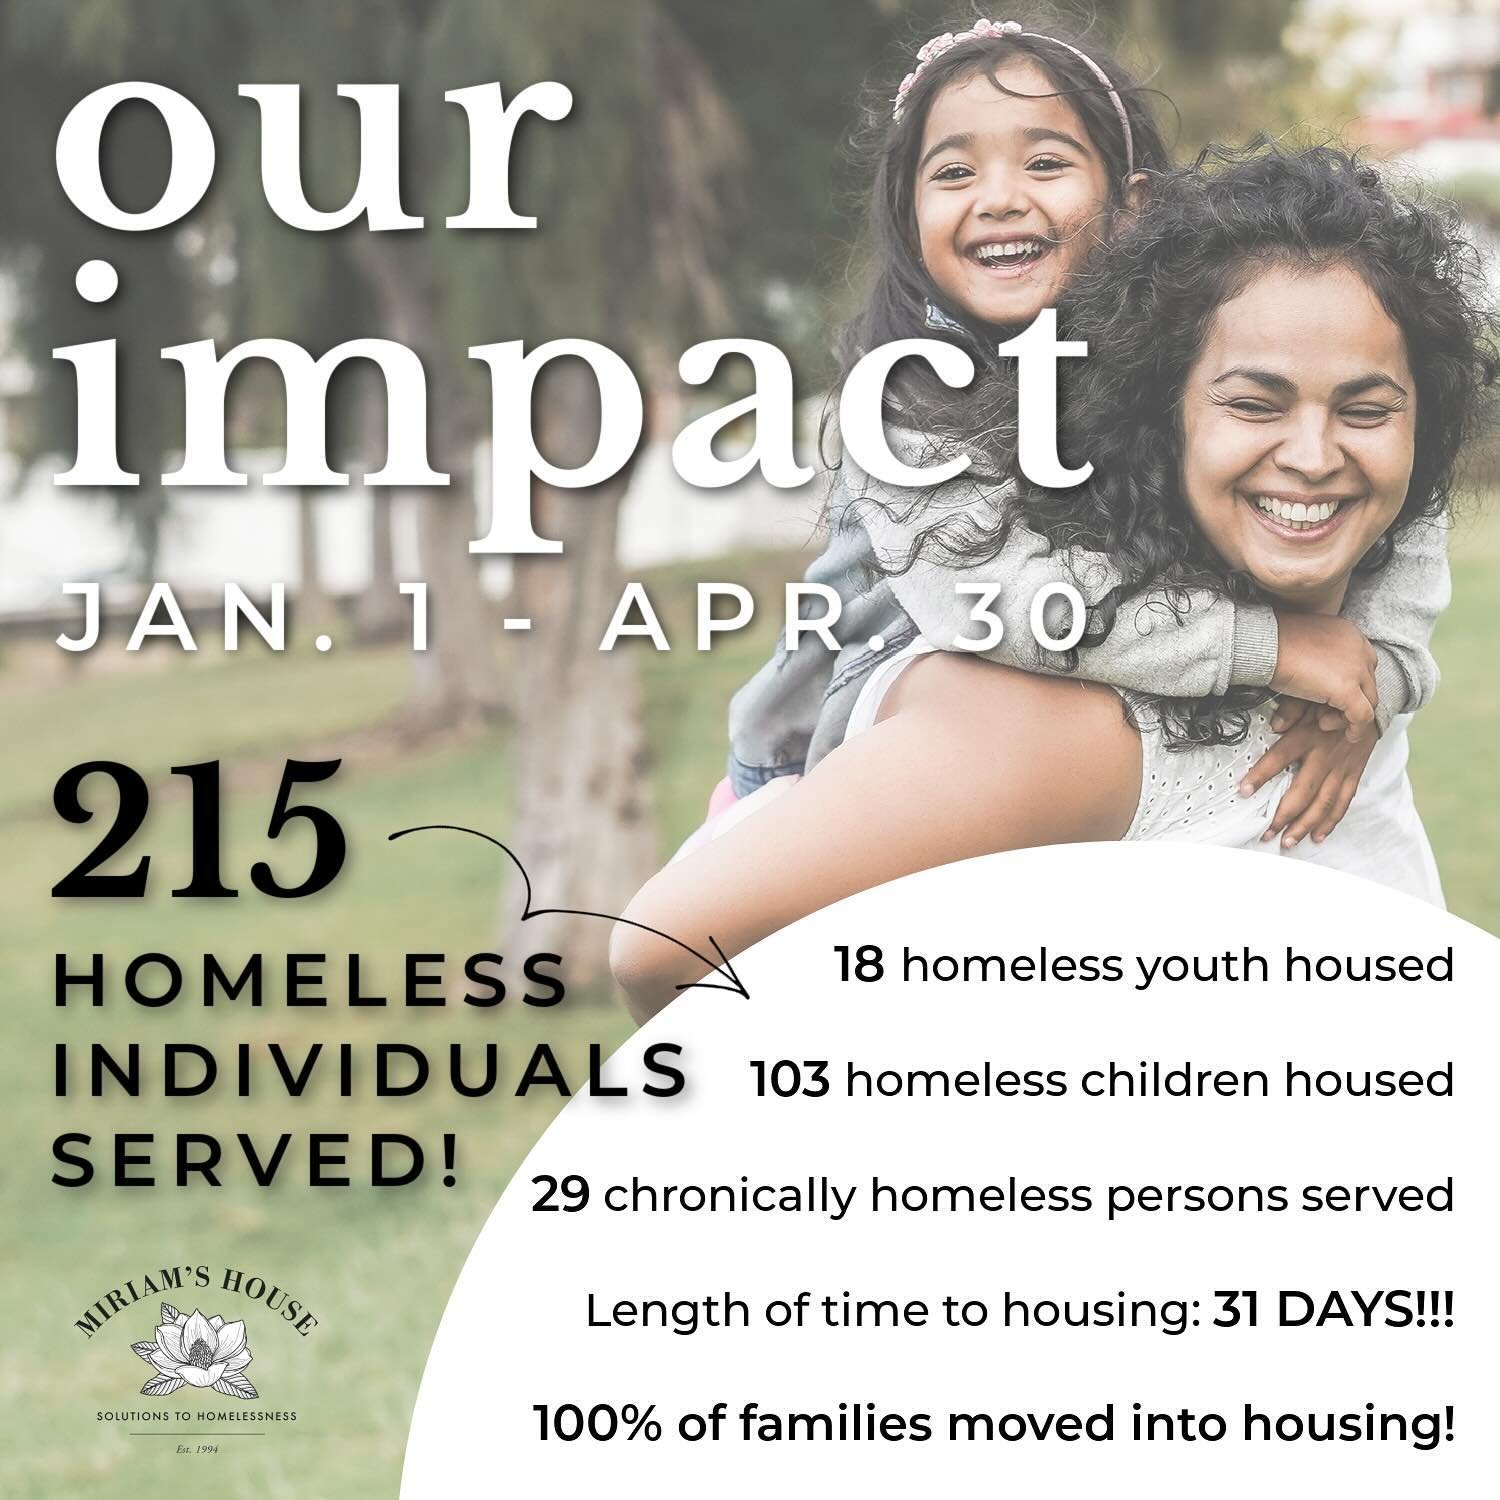 We&rsquo;re a third of the way through the year and our team has been busy! Since January 1st, your support has allowed us to serve 215 of our neighbors experiencing homelessness, including 103 children, 18 youth, and 29 chronically homeless individu